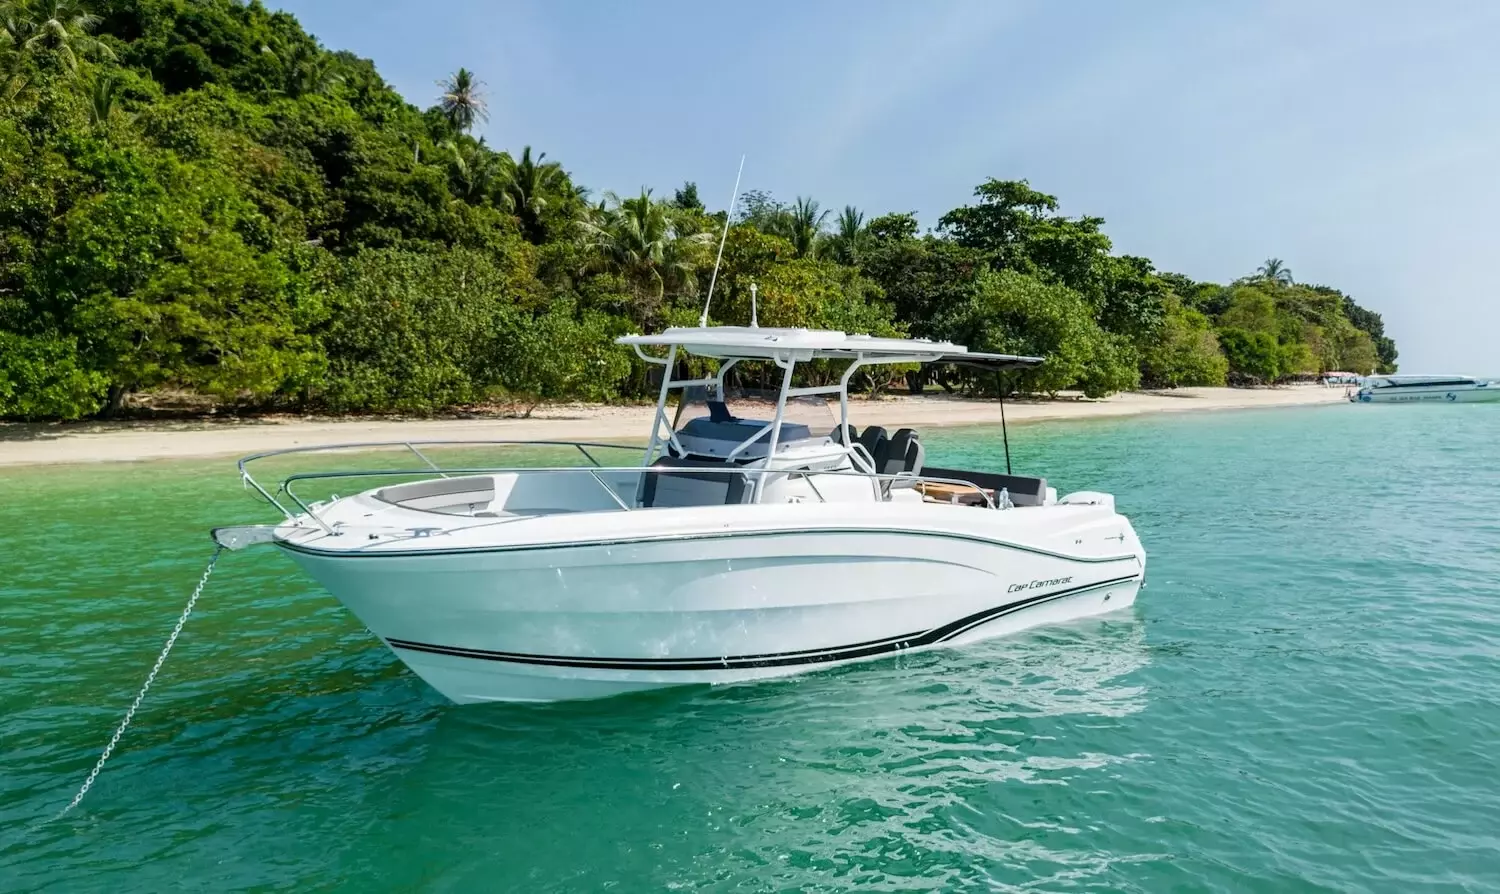 Na-O by Jeanneau - Top rates for a Rental of a private Power Boat in Thailand